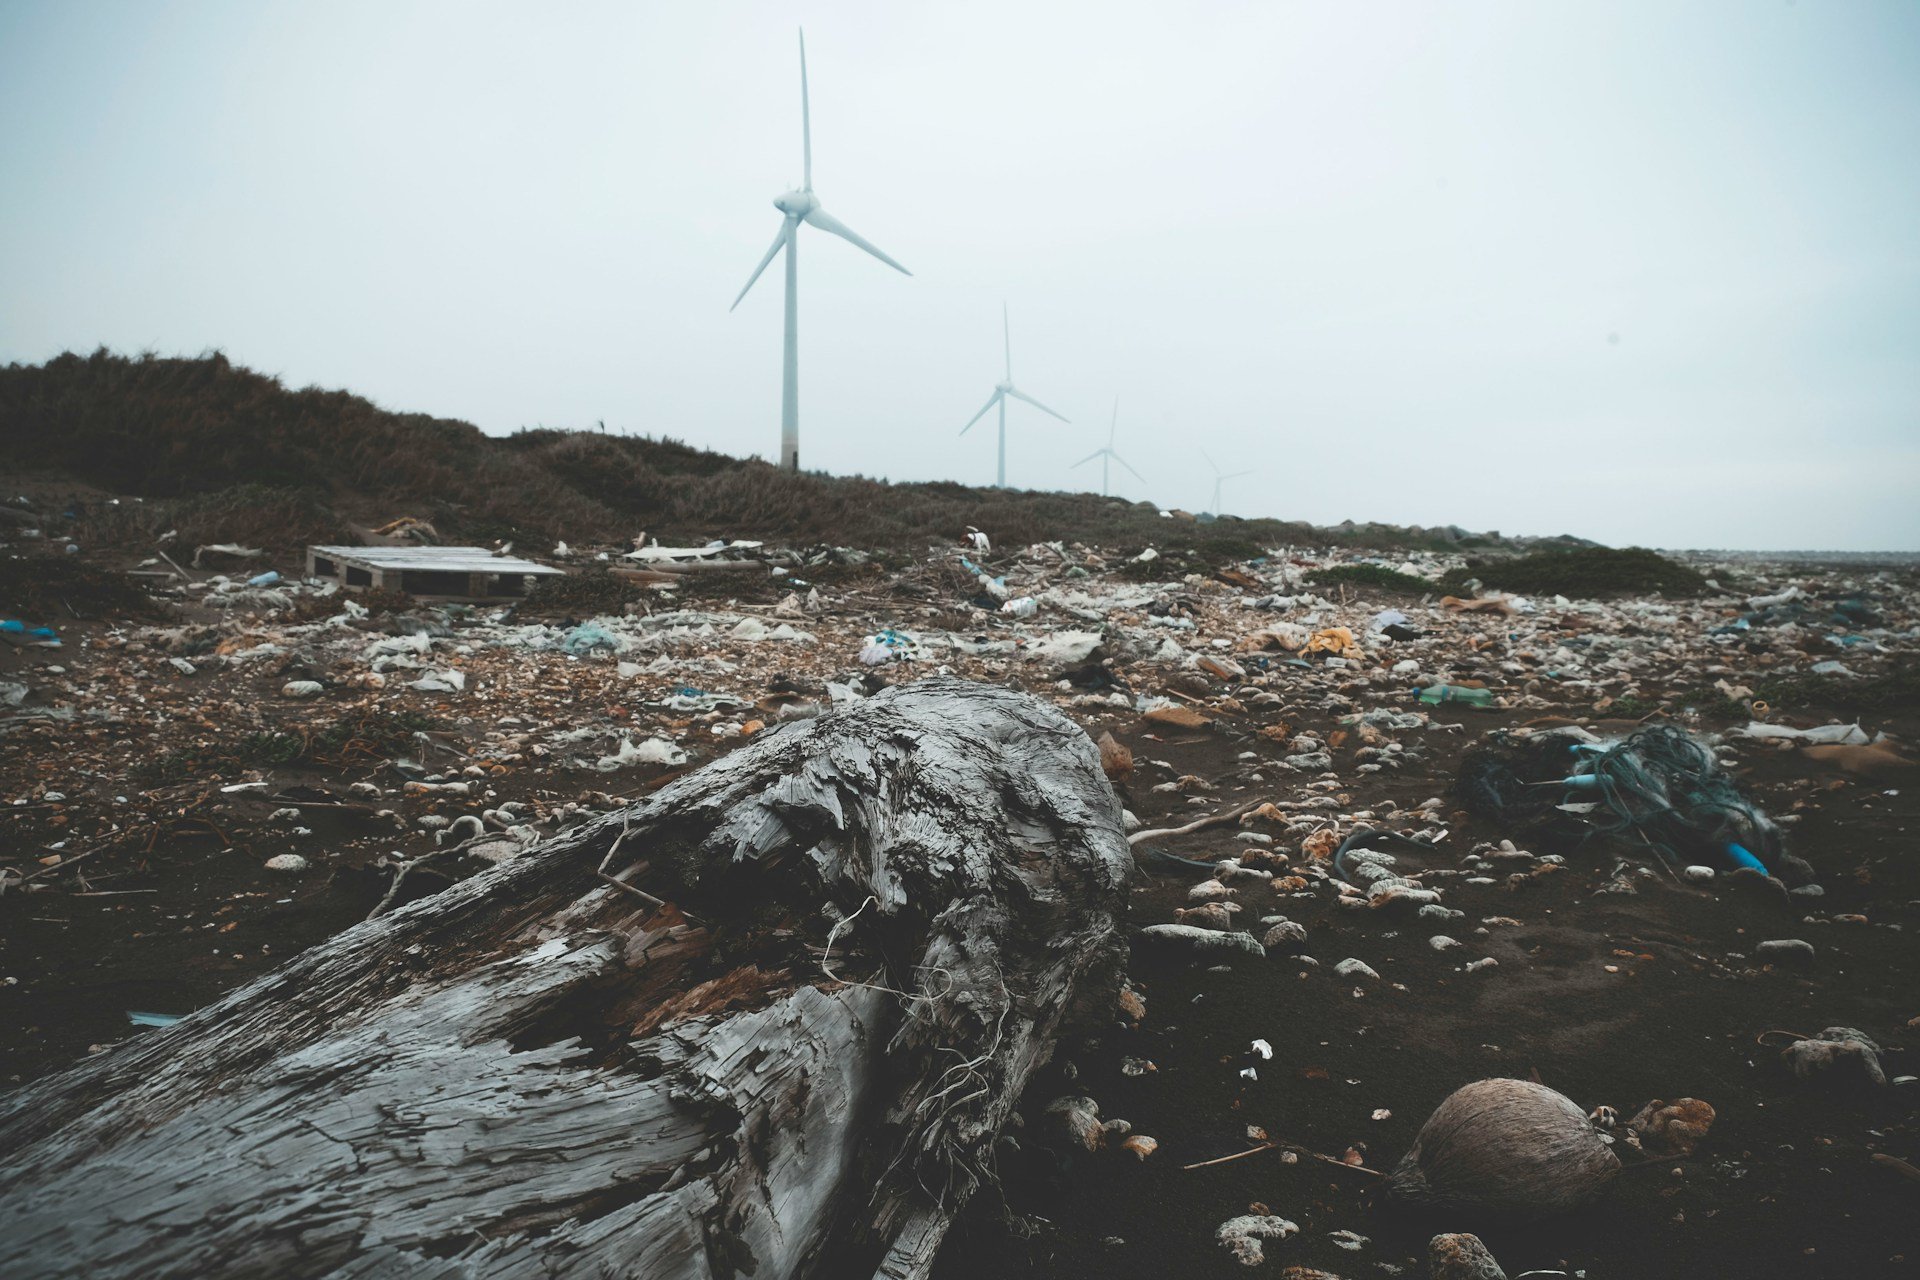 A beach in Guanyin District, Taiwan covered in plastic waste with a windmill in the background